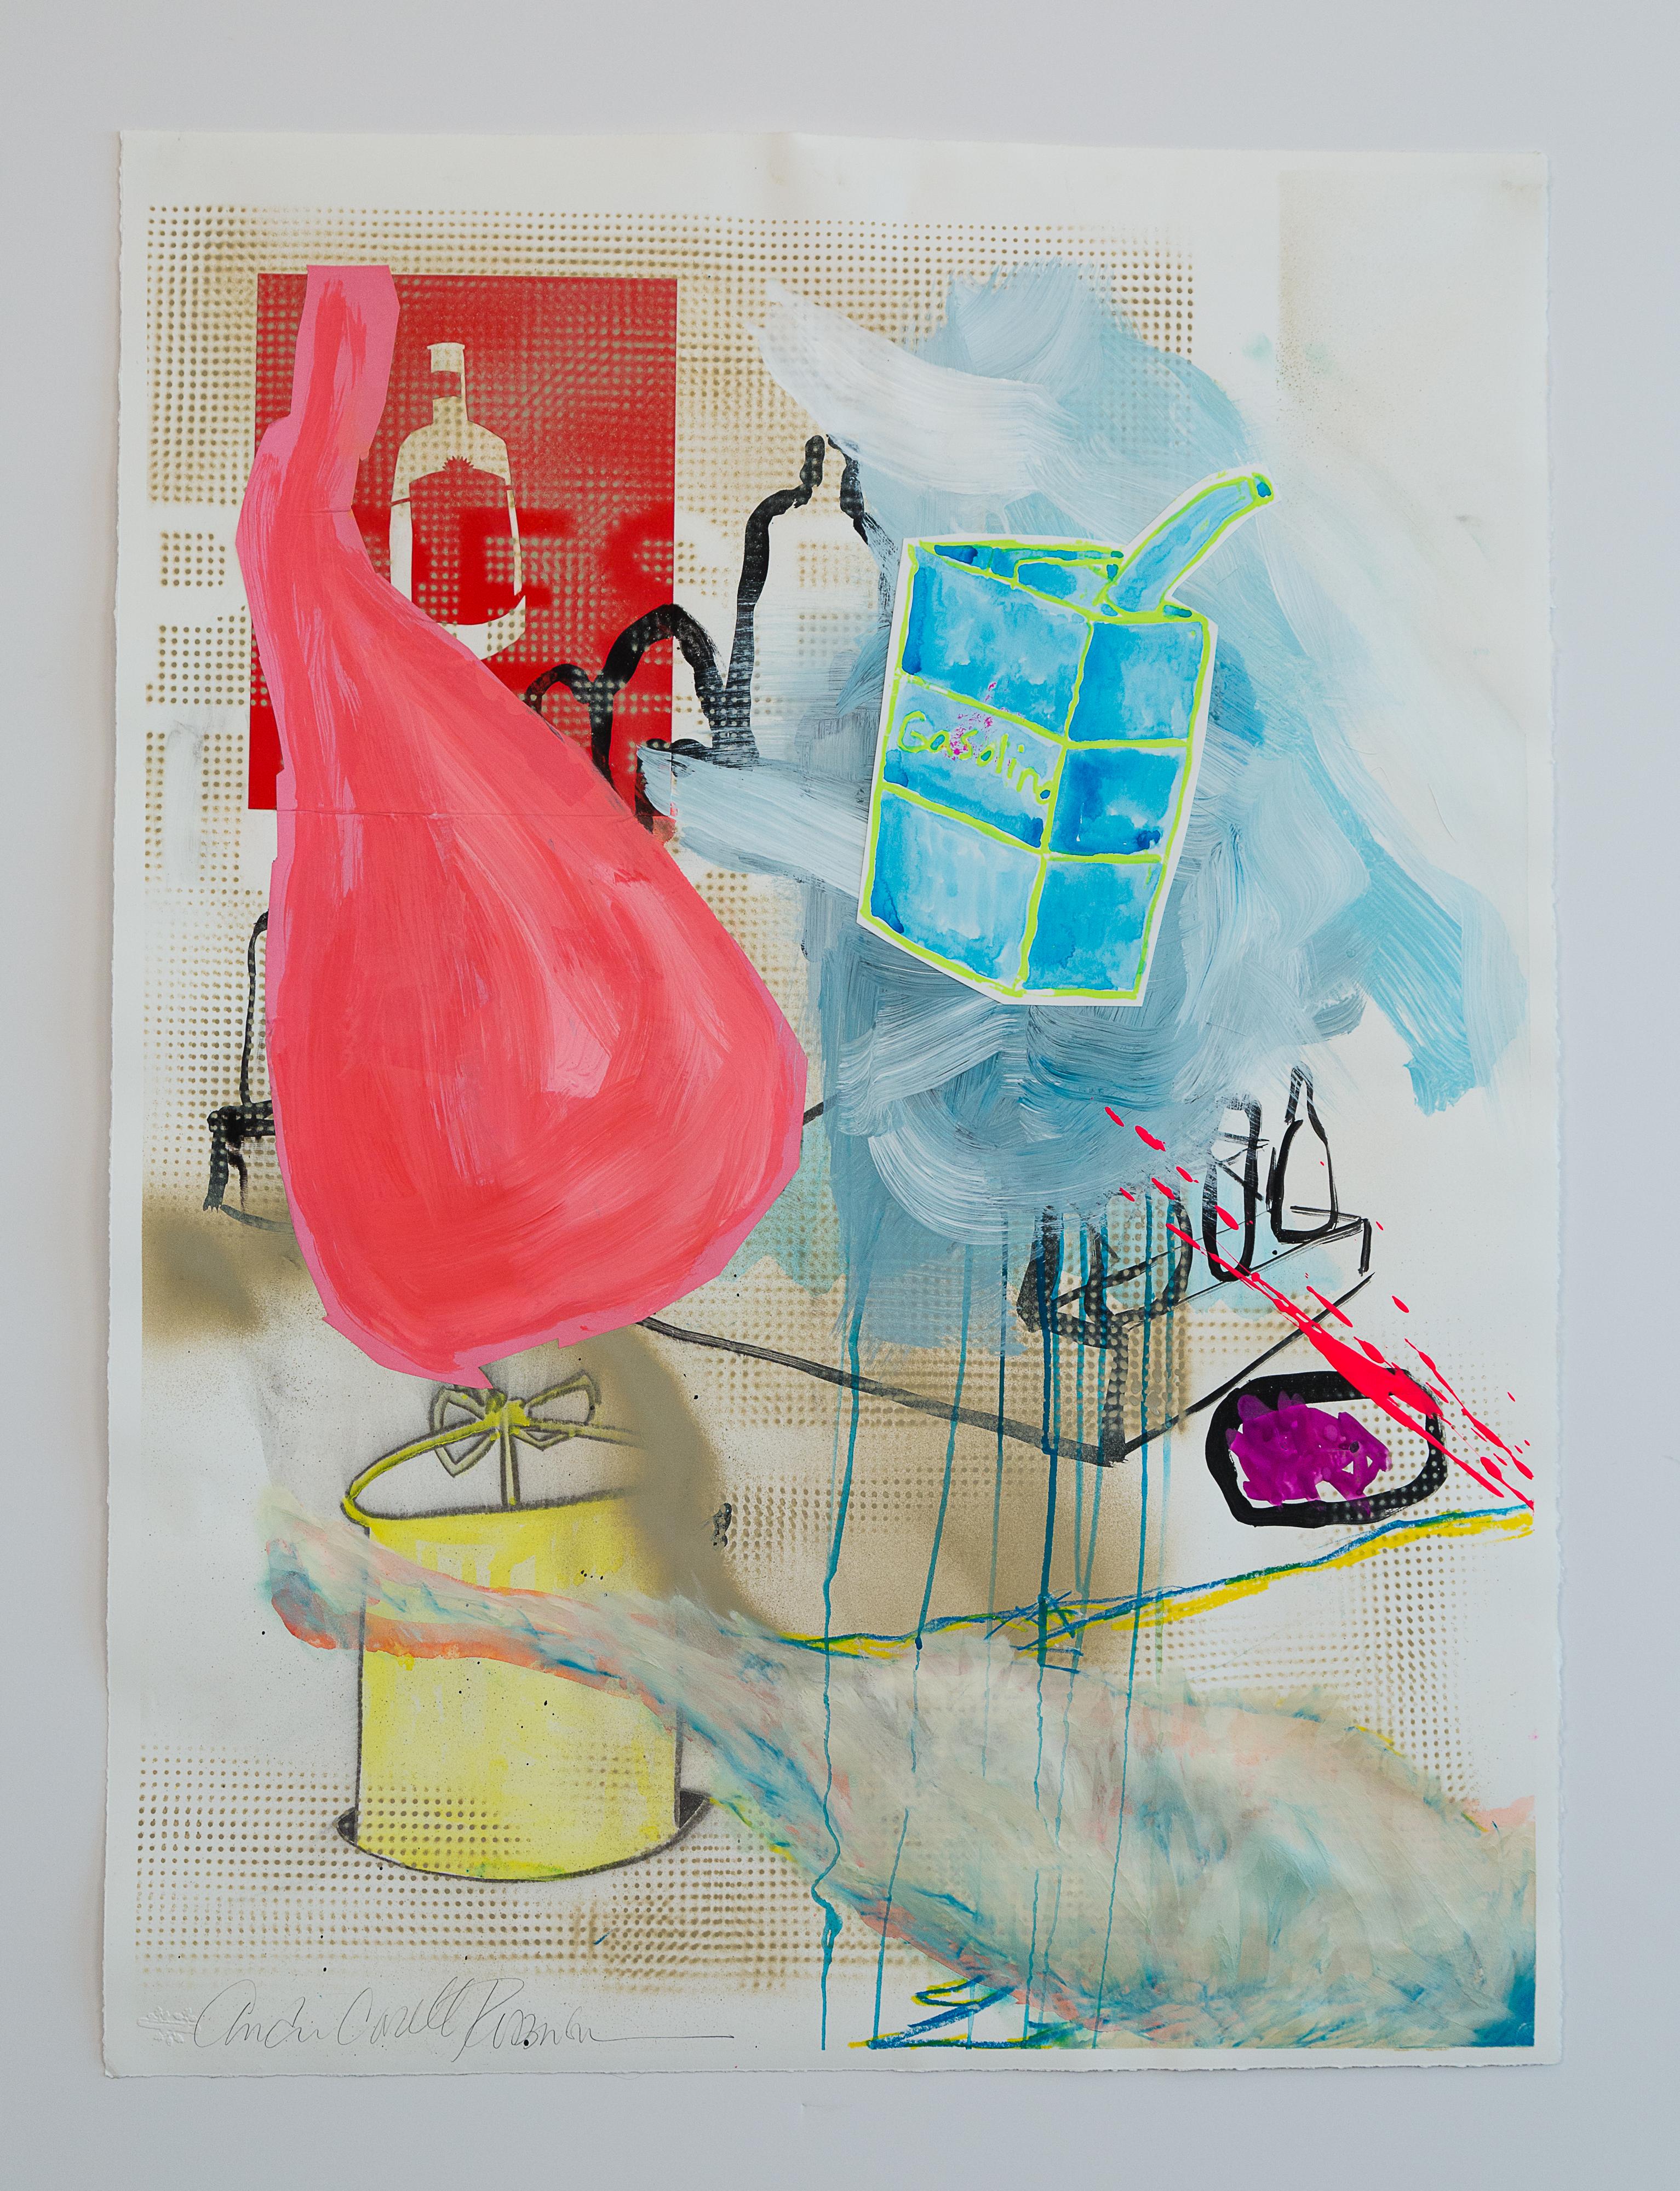 "DRAWING INVENTORY (Jamón y Gasolina)", acrylic painting, ham, gasoline, collage